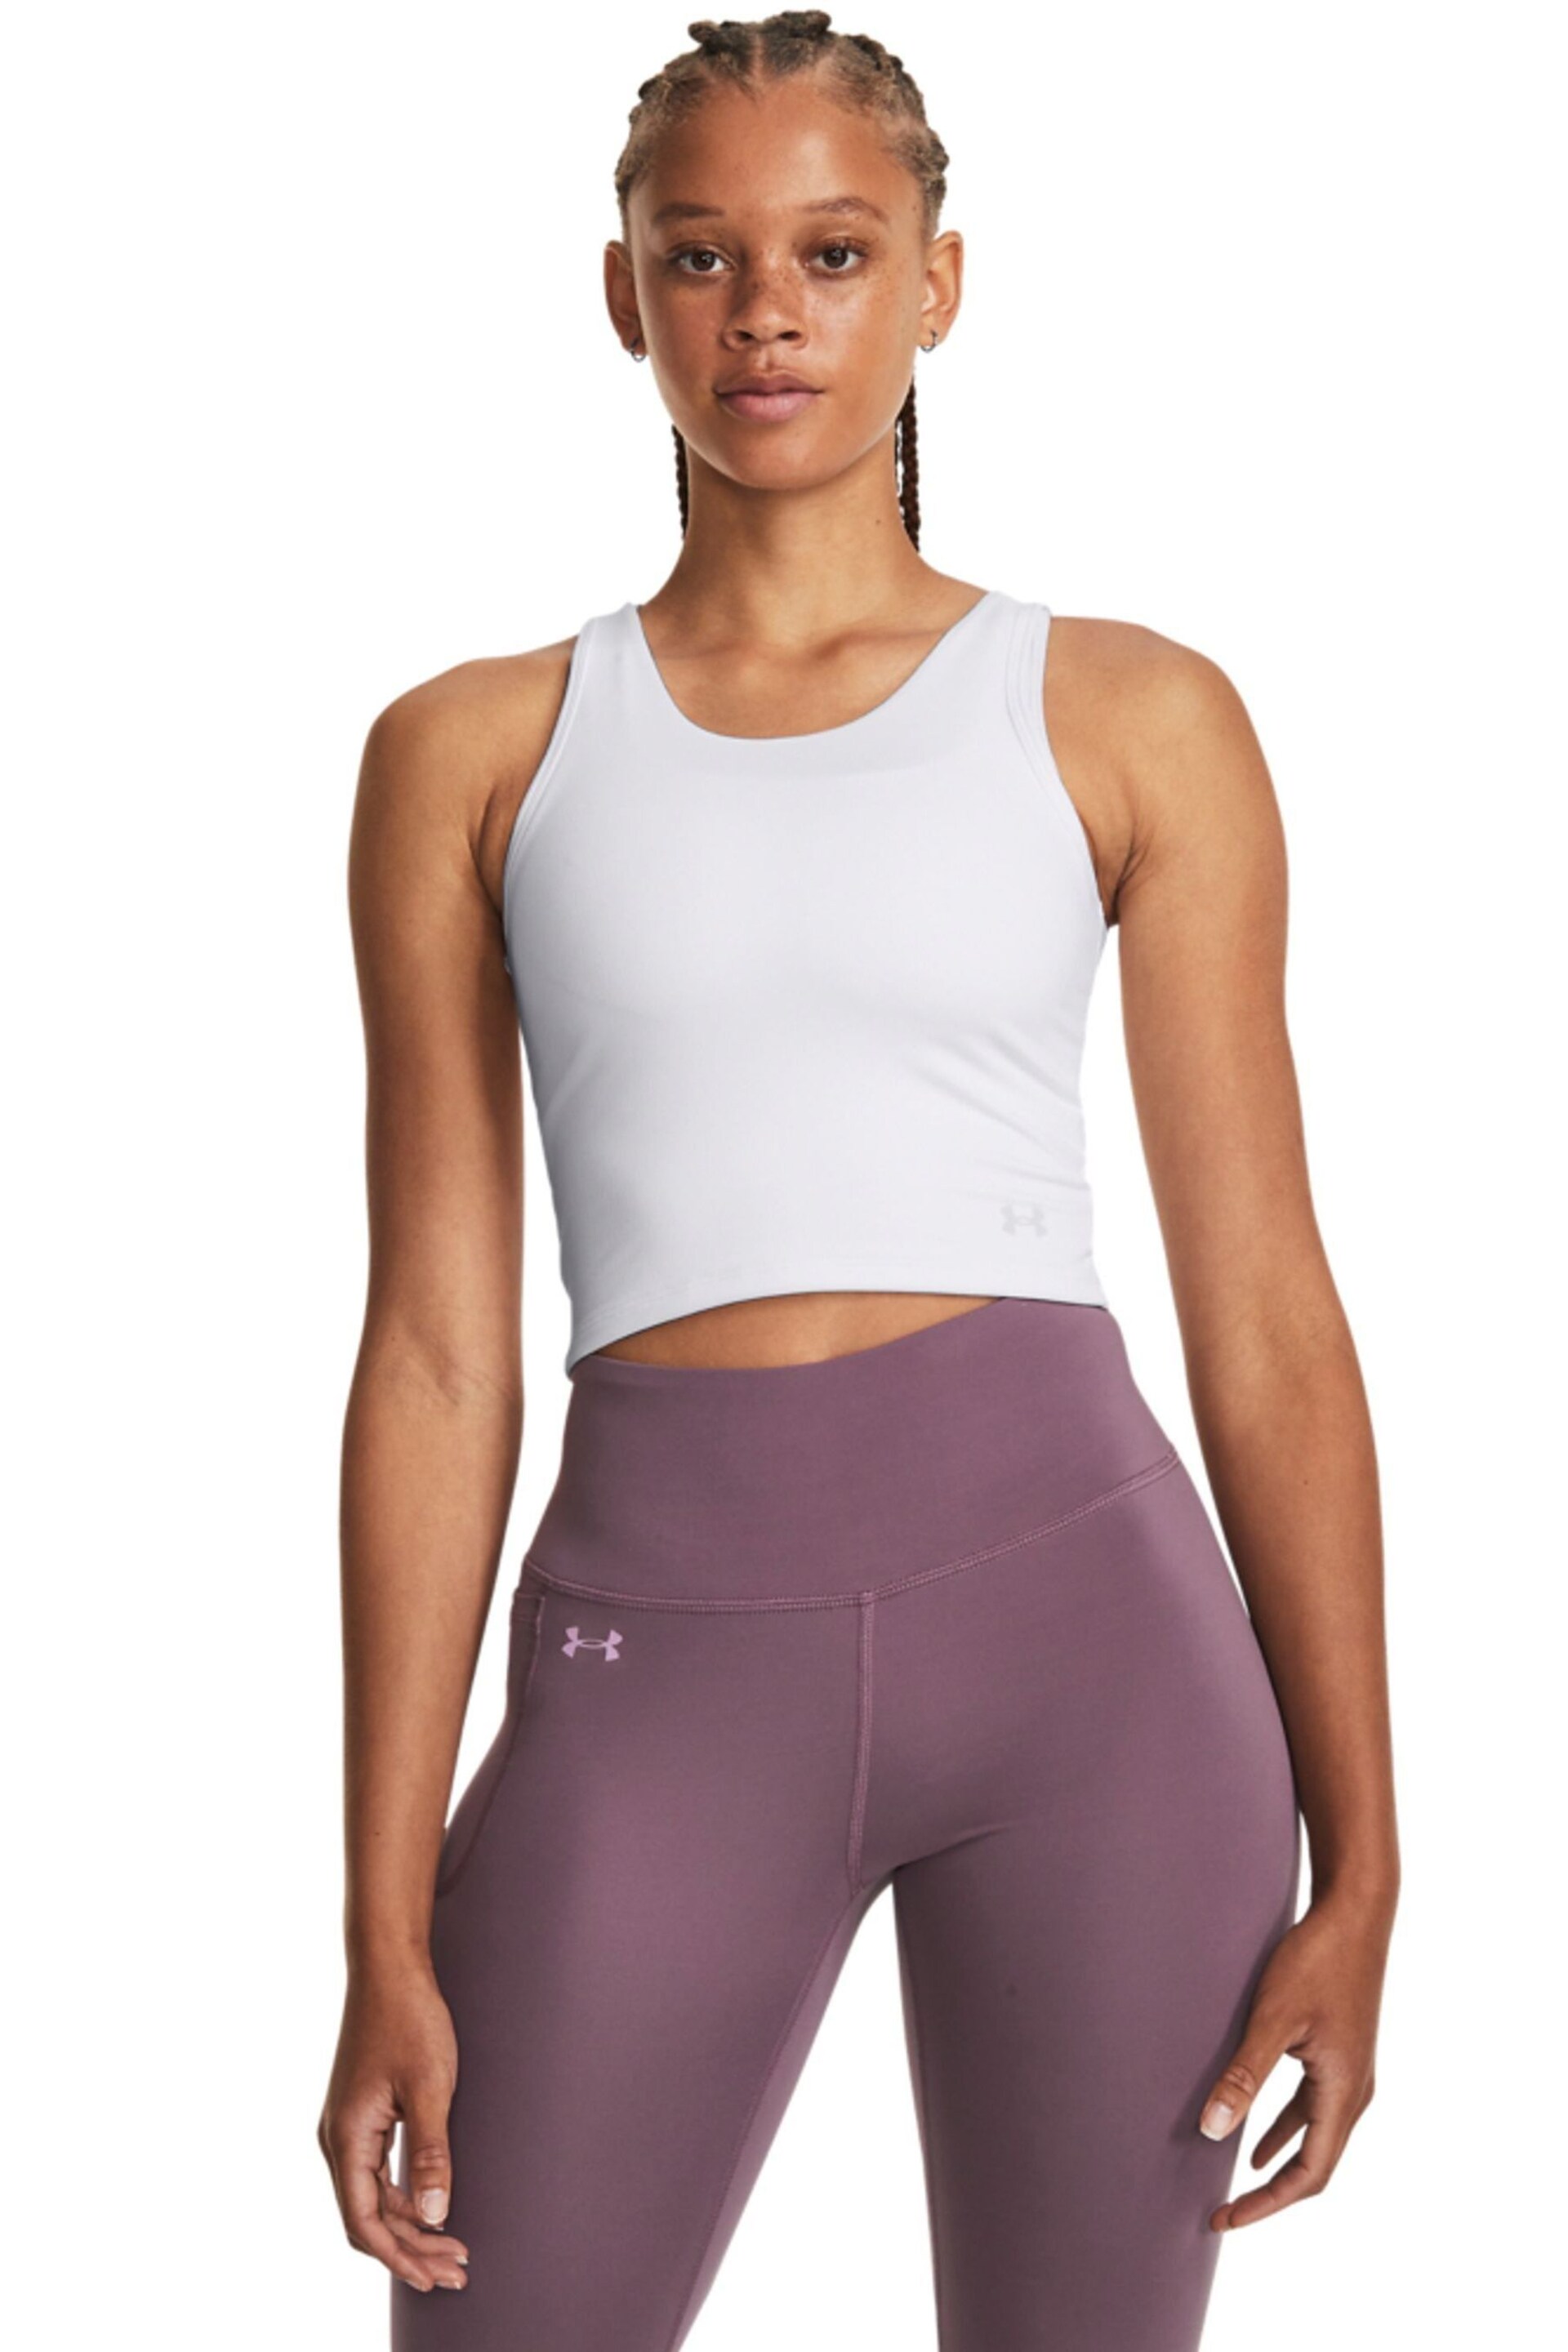 Under Armour White Motion Crop Top - Image 1 of 7